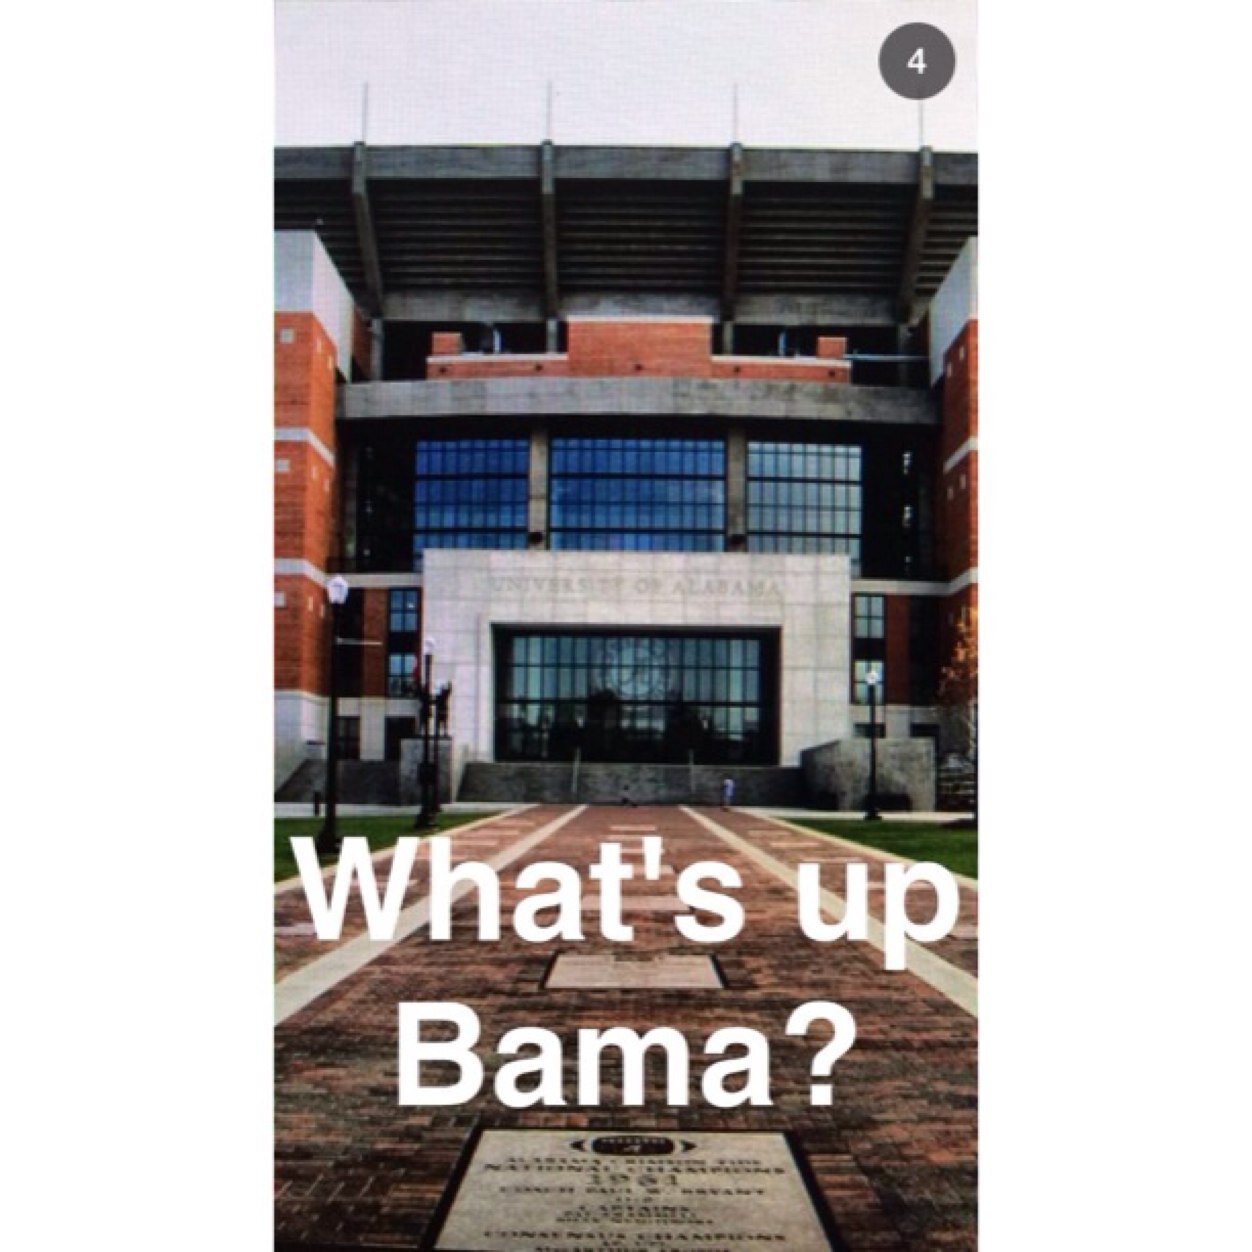 This feed is about the every day life of a University of Alabama student.. shown through various snaps! Snapchat: Bamasnaps #UASnapChat